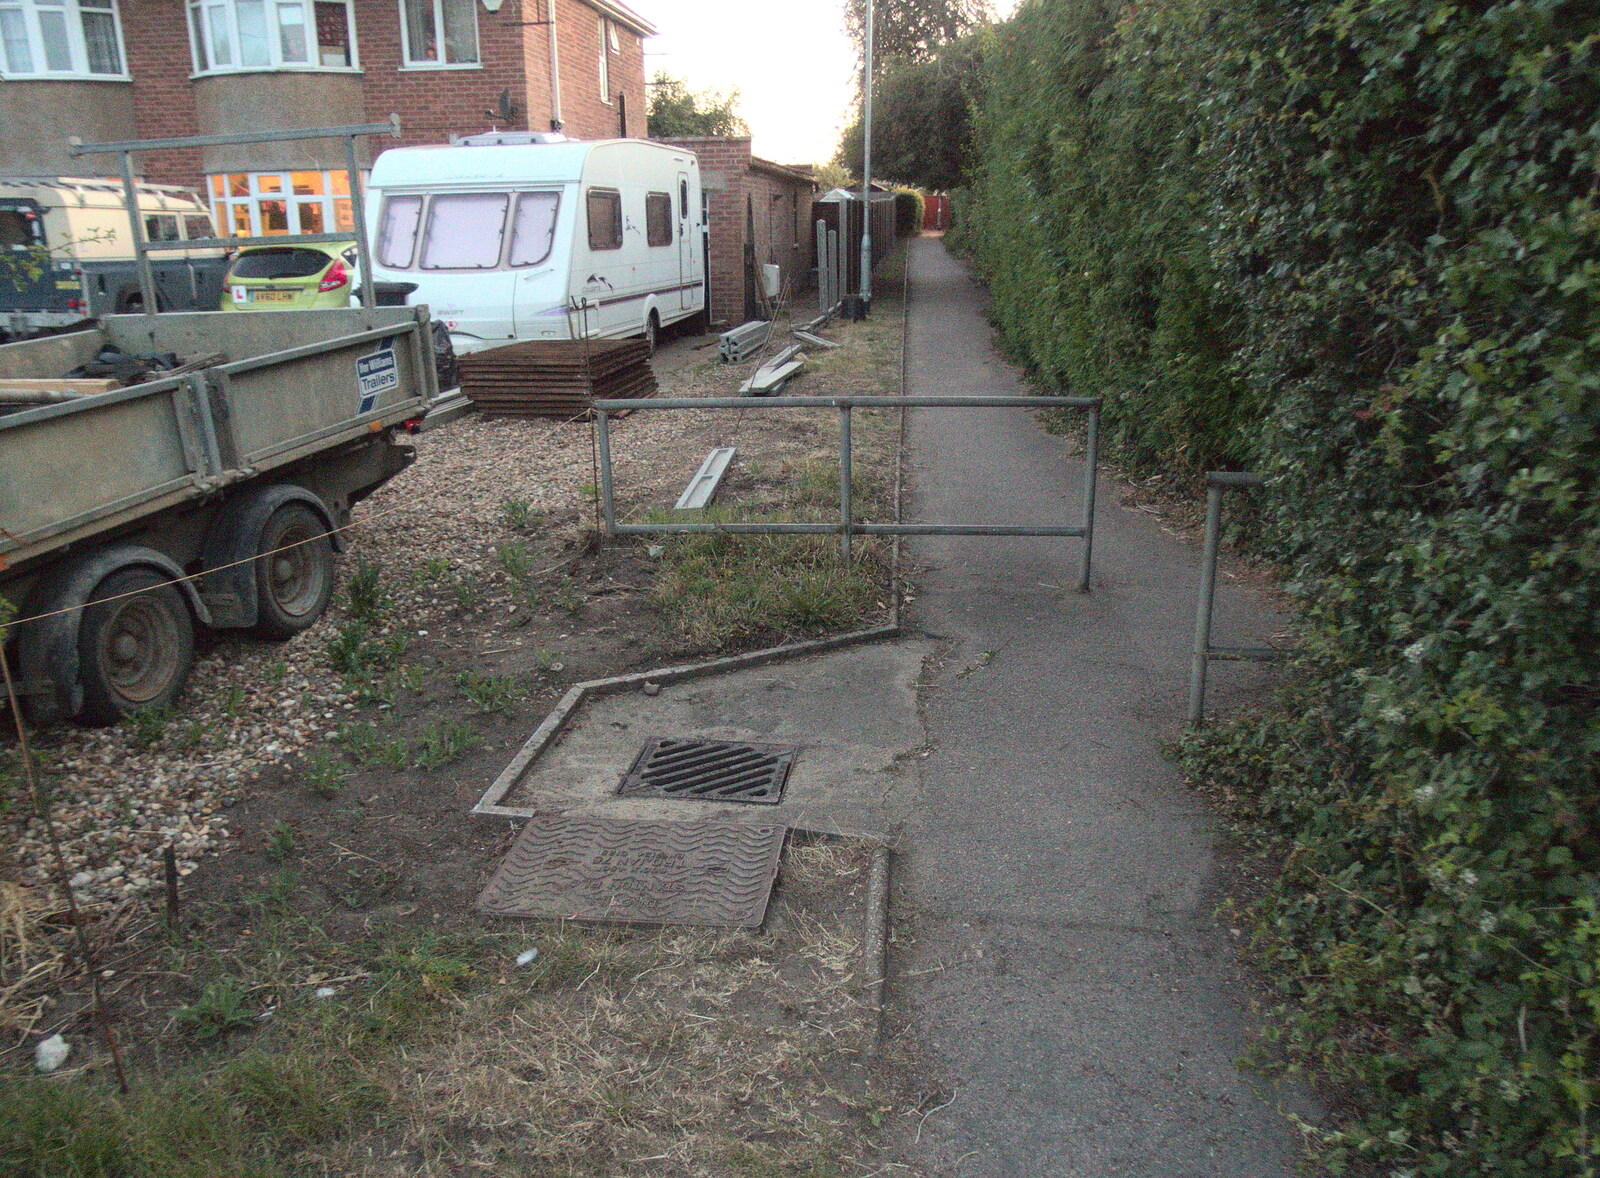 The path to the estate is fenceless from Pizza at the Village Hall, Brome, Suffolk - 24th June 2022